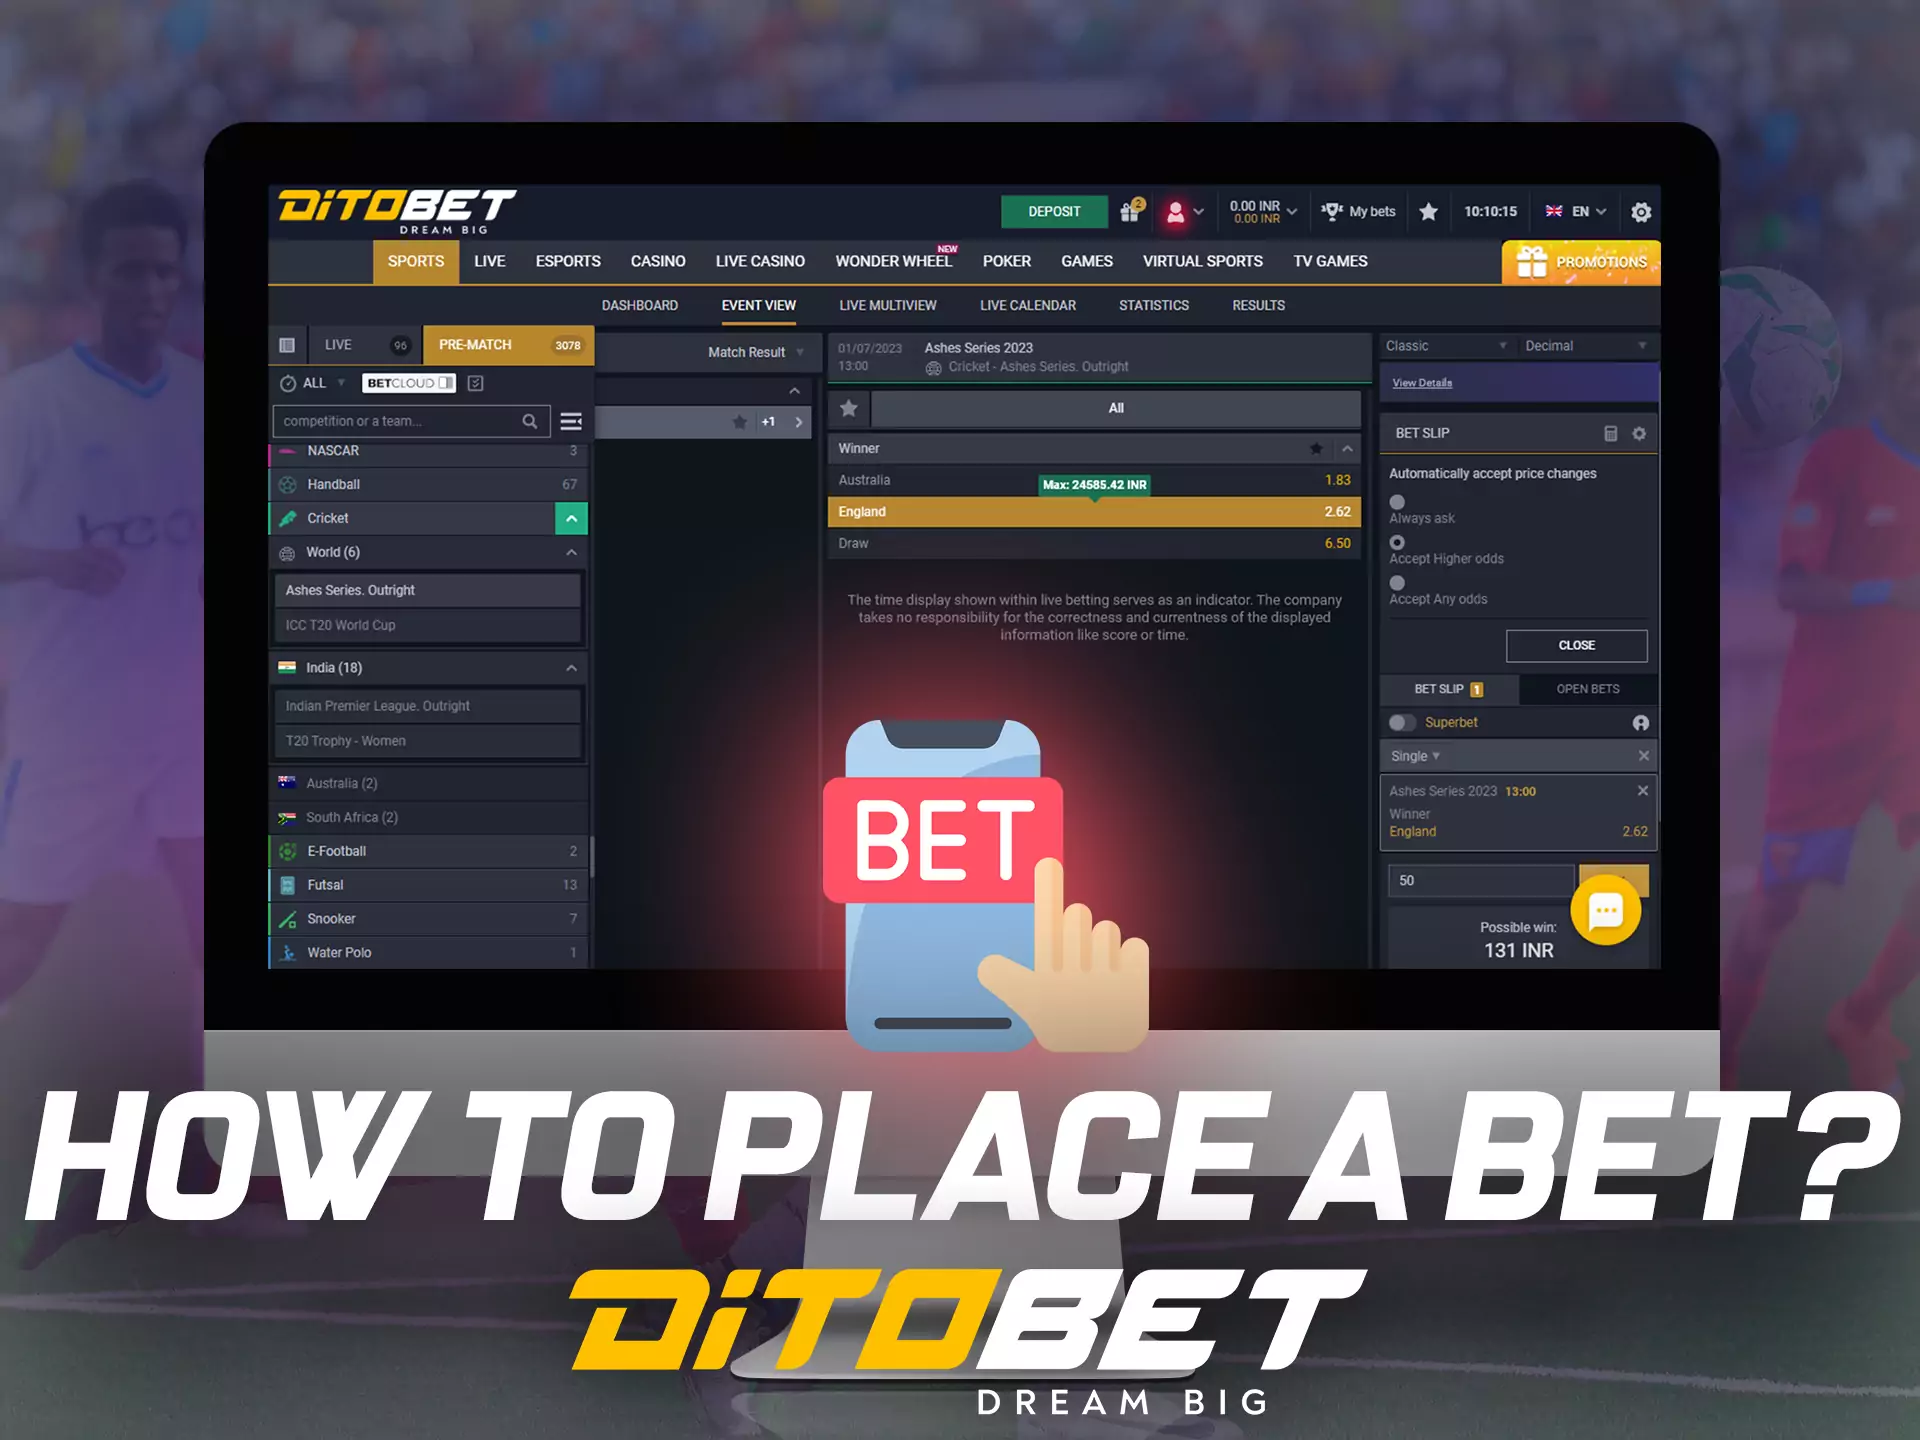 Make your first bet with Ditobet, use the instructions.